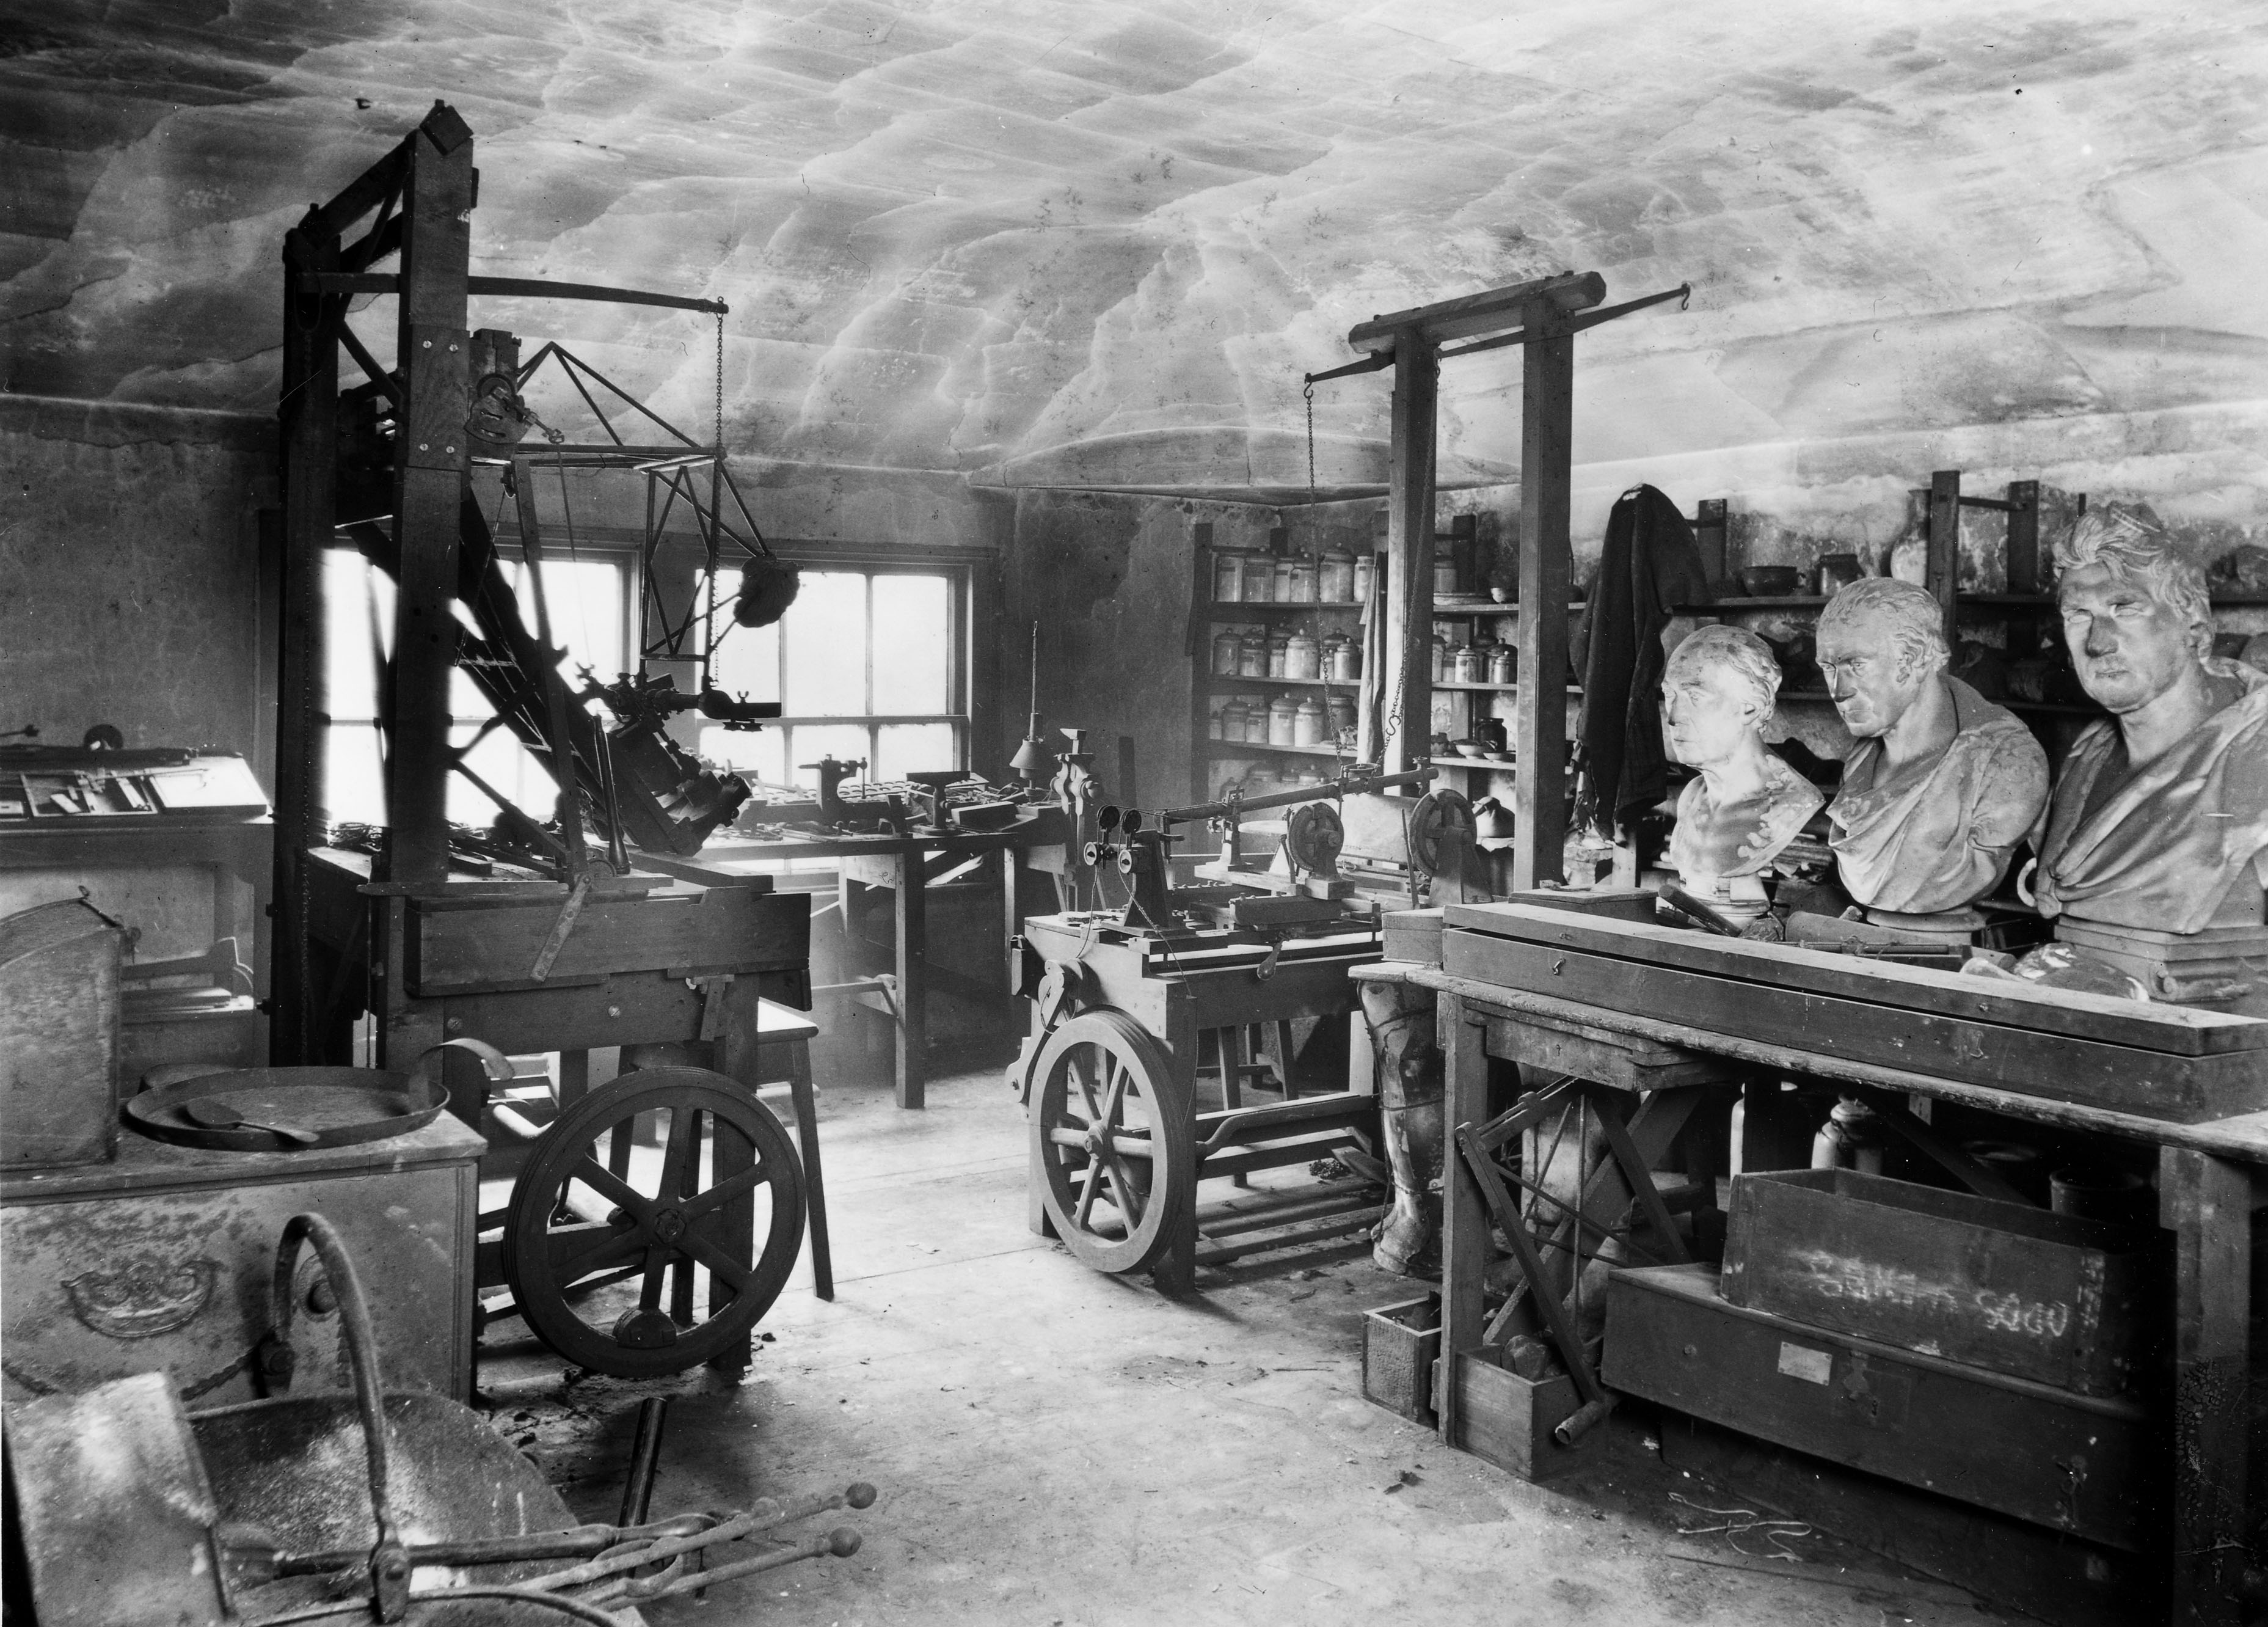 Image: The workshop of James Watt (1736-1819), December 1924. One of four photographs taken at Heathfield by J Willoughby Harr © Science Museum/Science & Society Picture Library